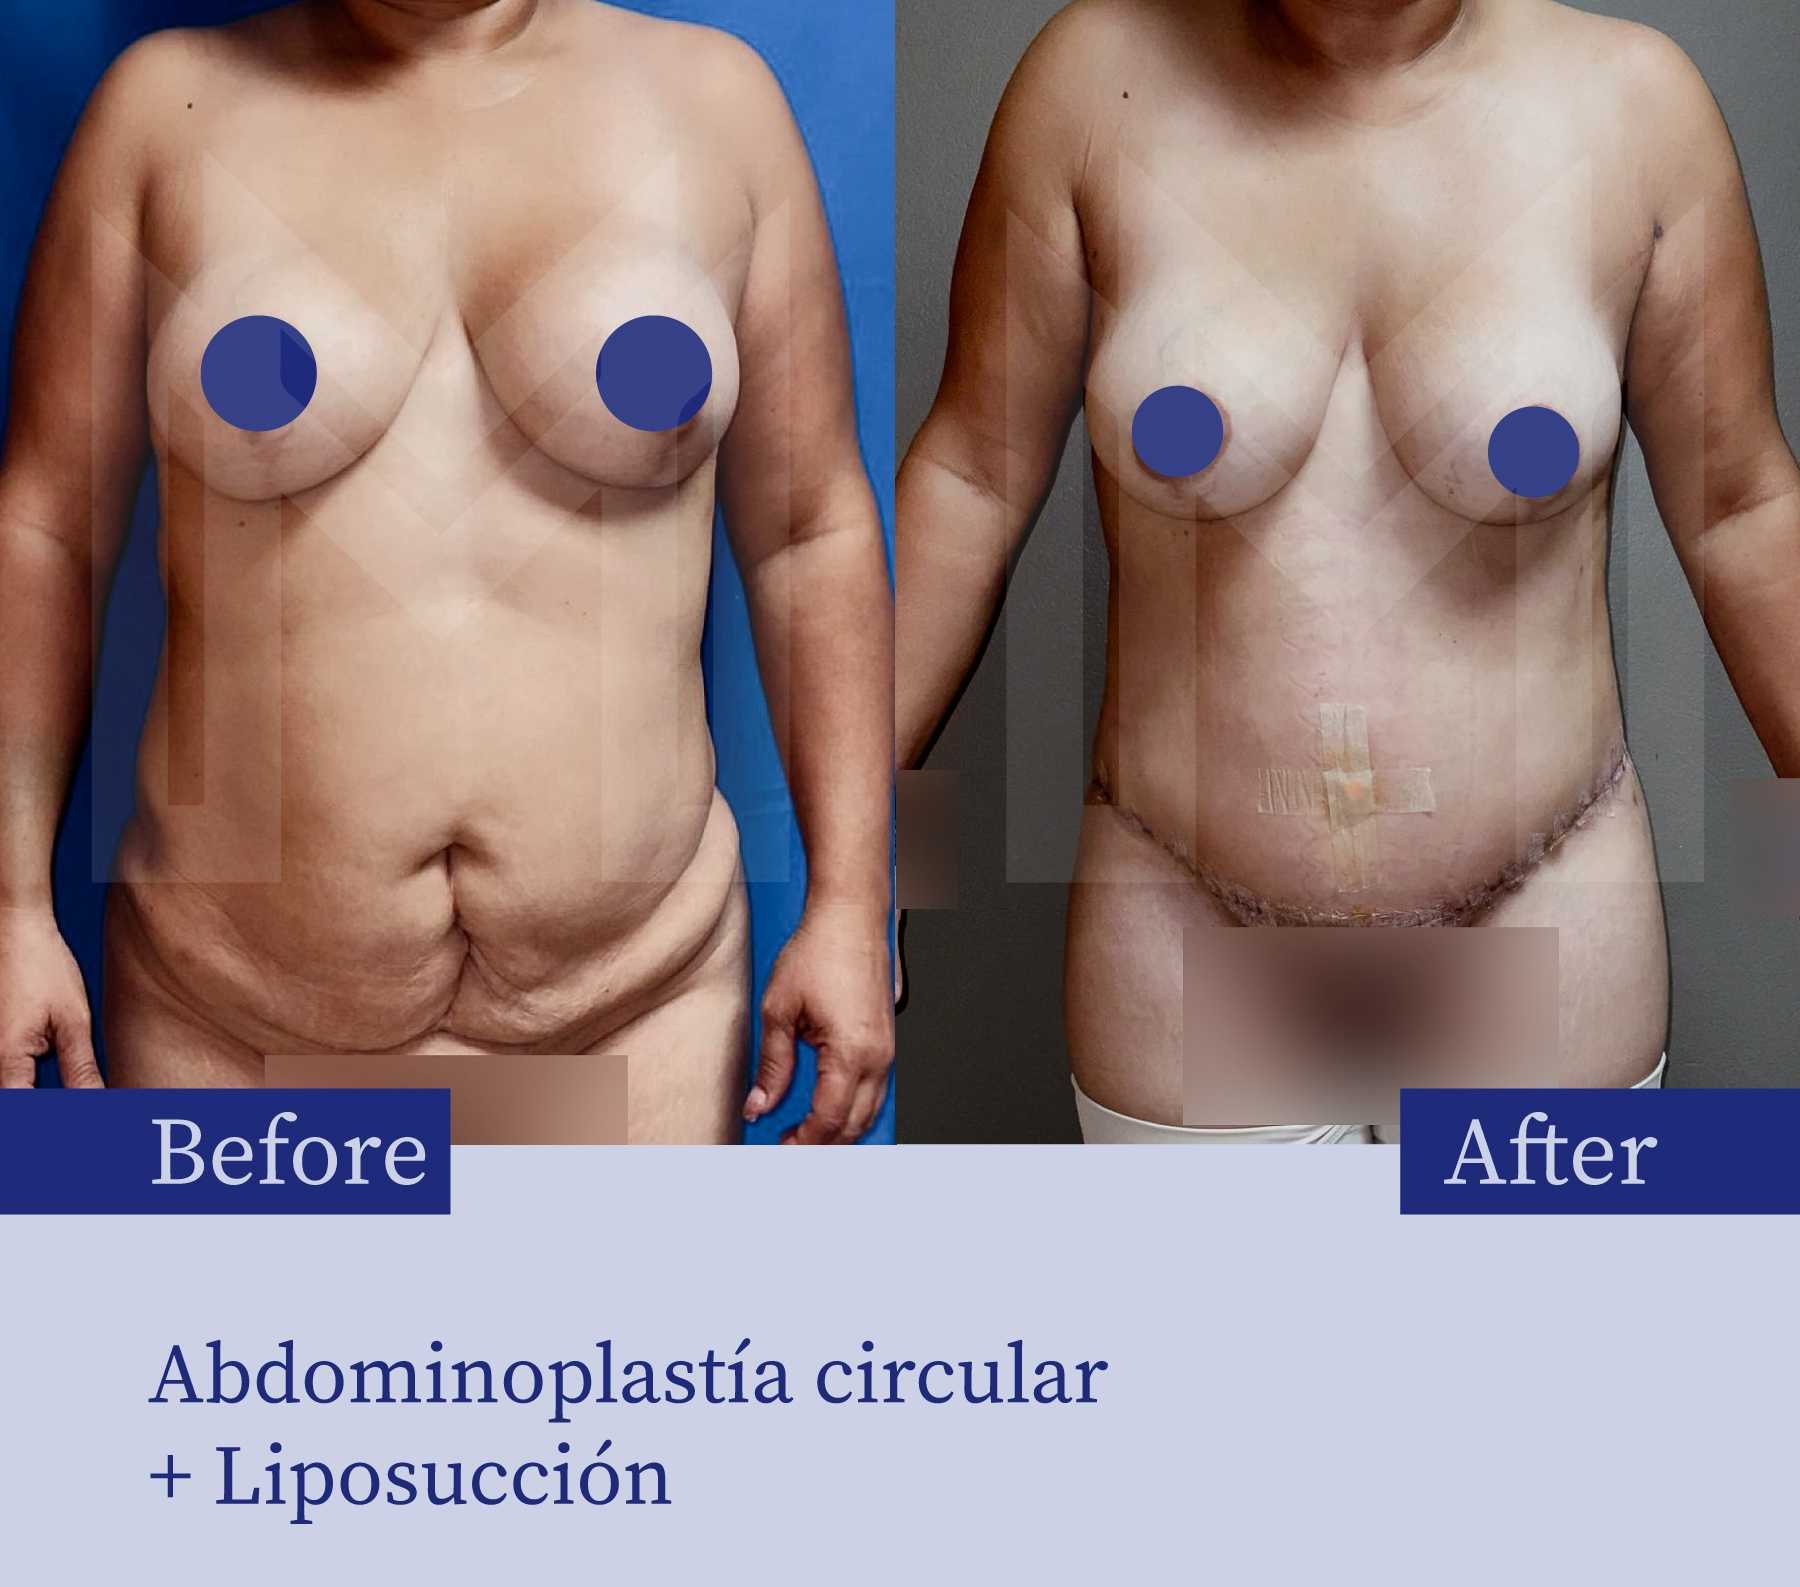 Before After Tummy Tuck Marciales in Tijuana Mexico